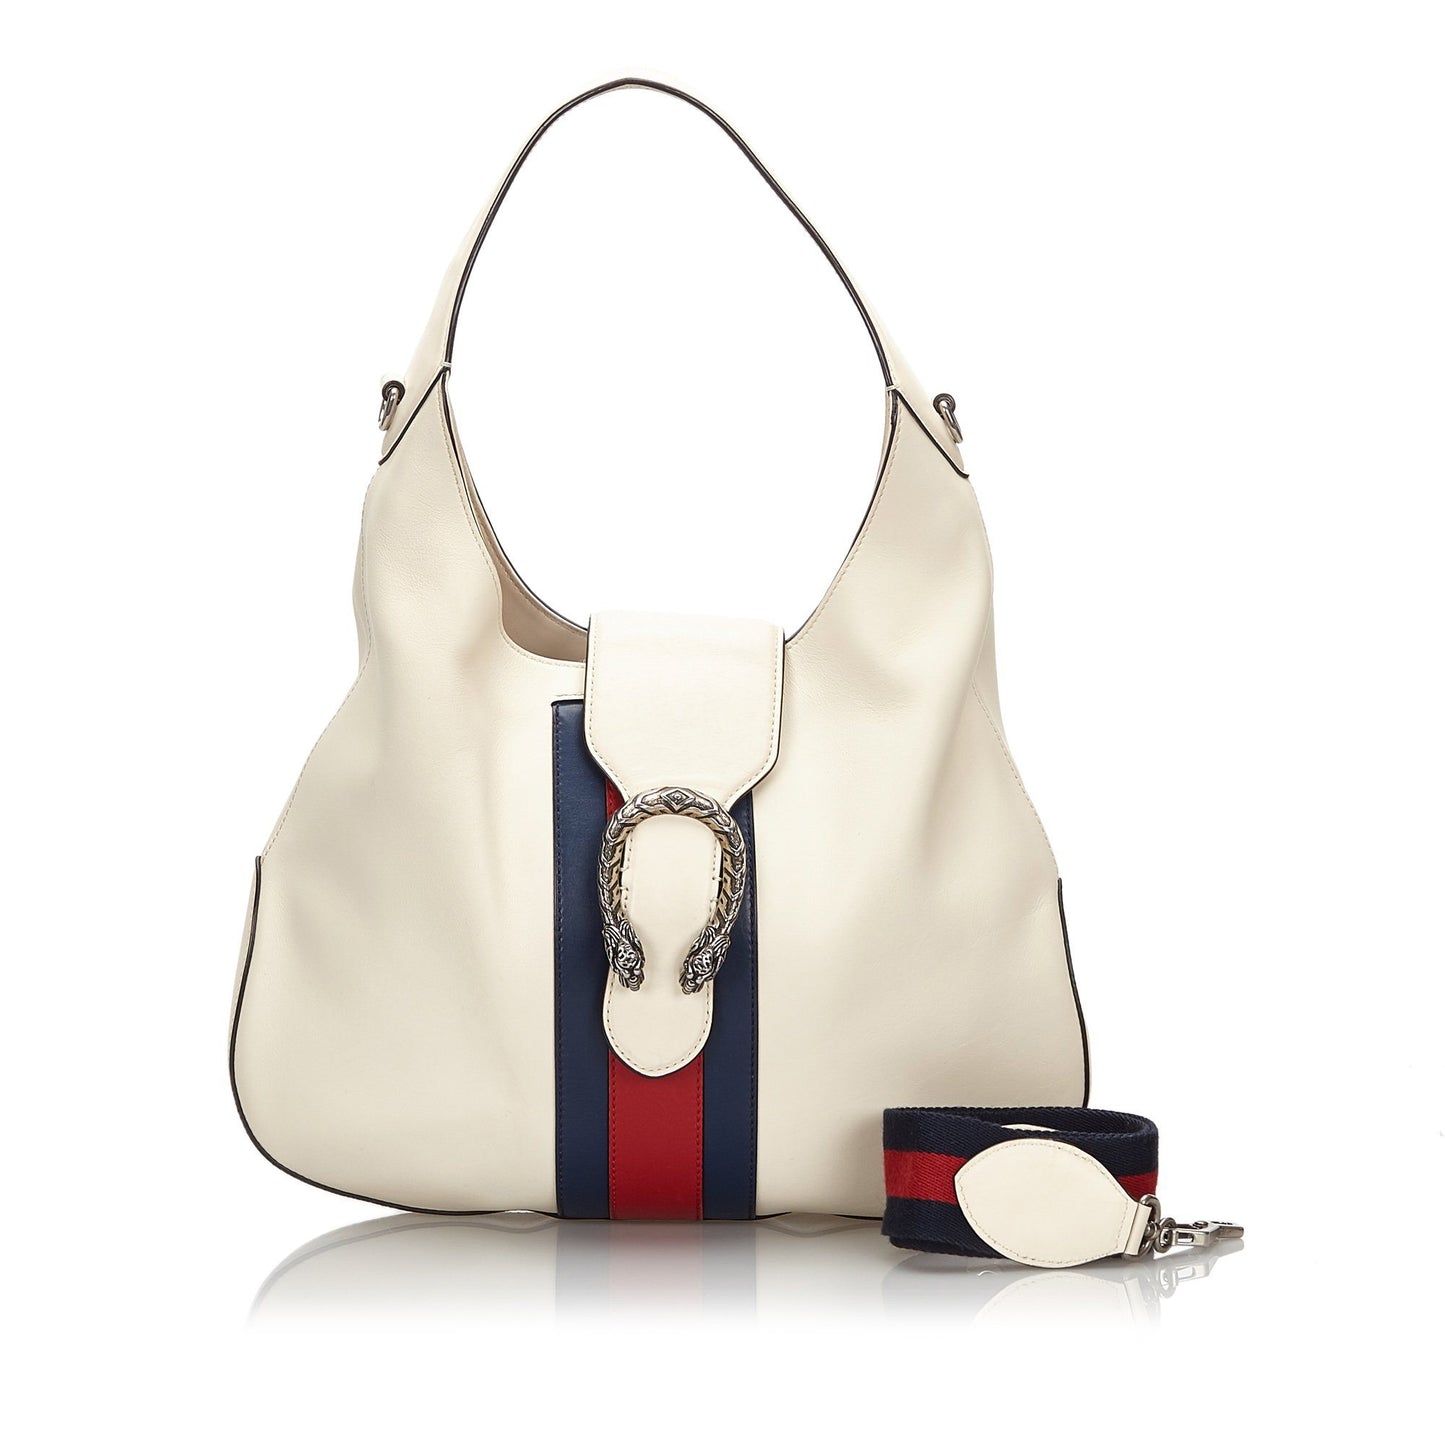 Gucci Dionysus Web Leather Hobo Bags Gucci 